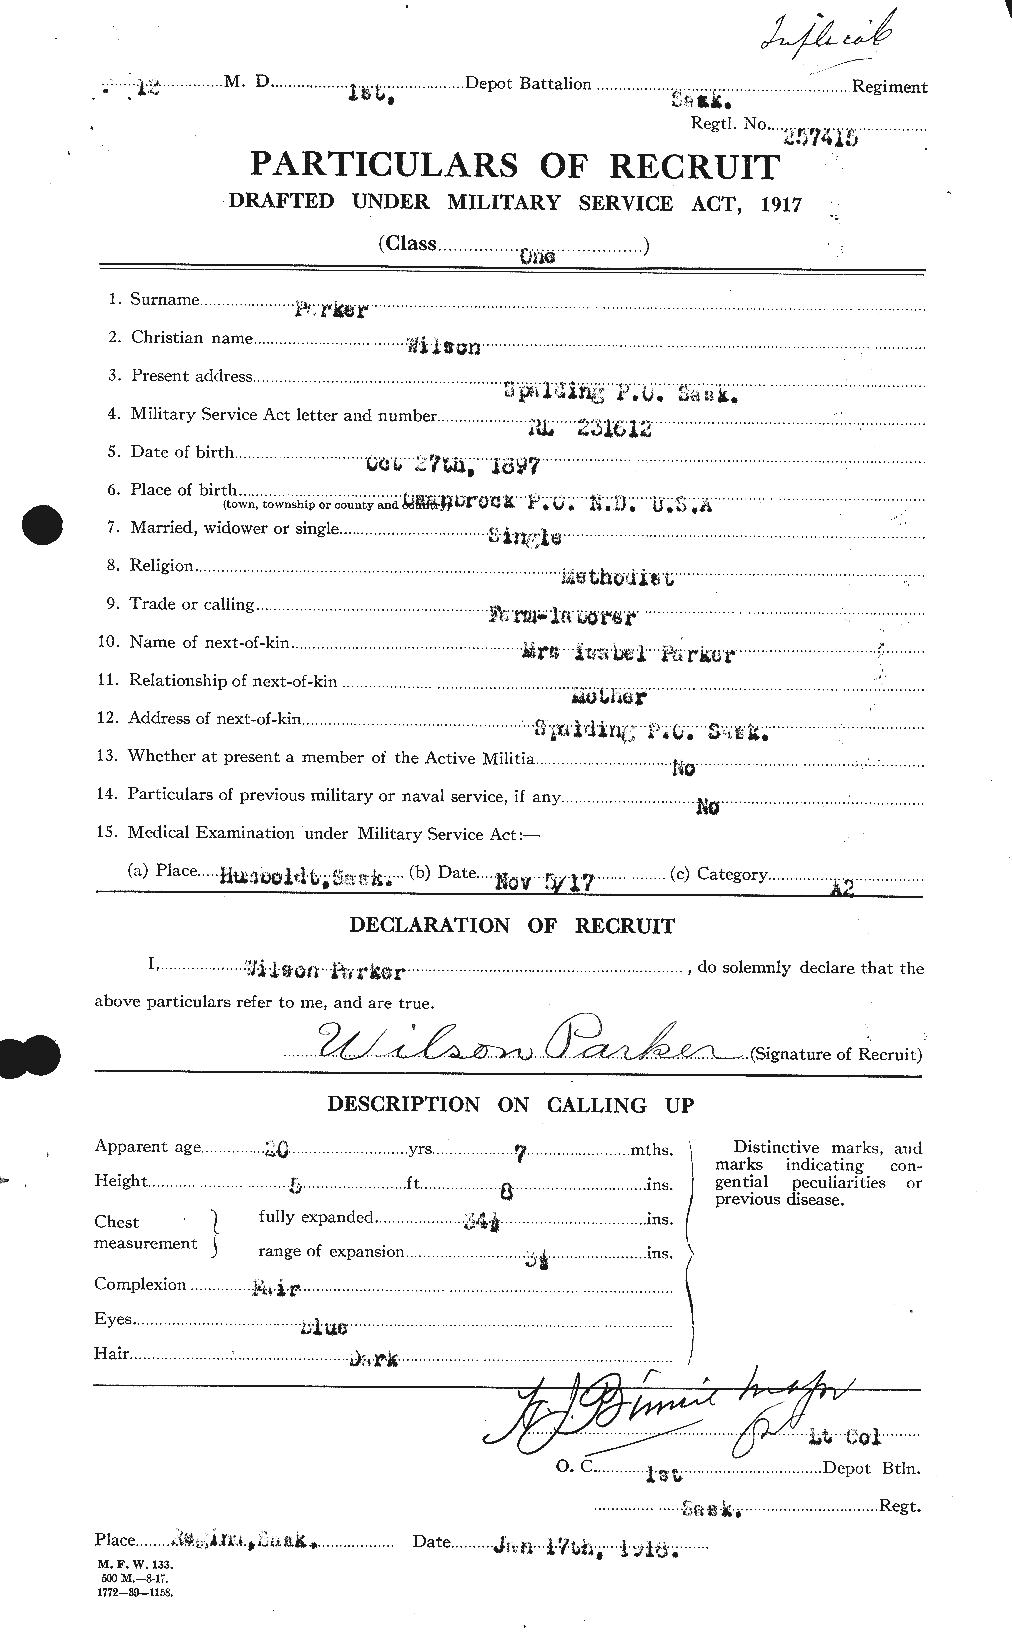 Personnel Records of the First World War - CEF 565793a